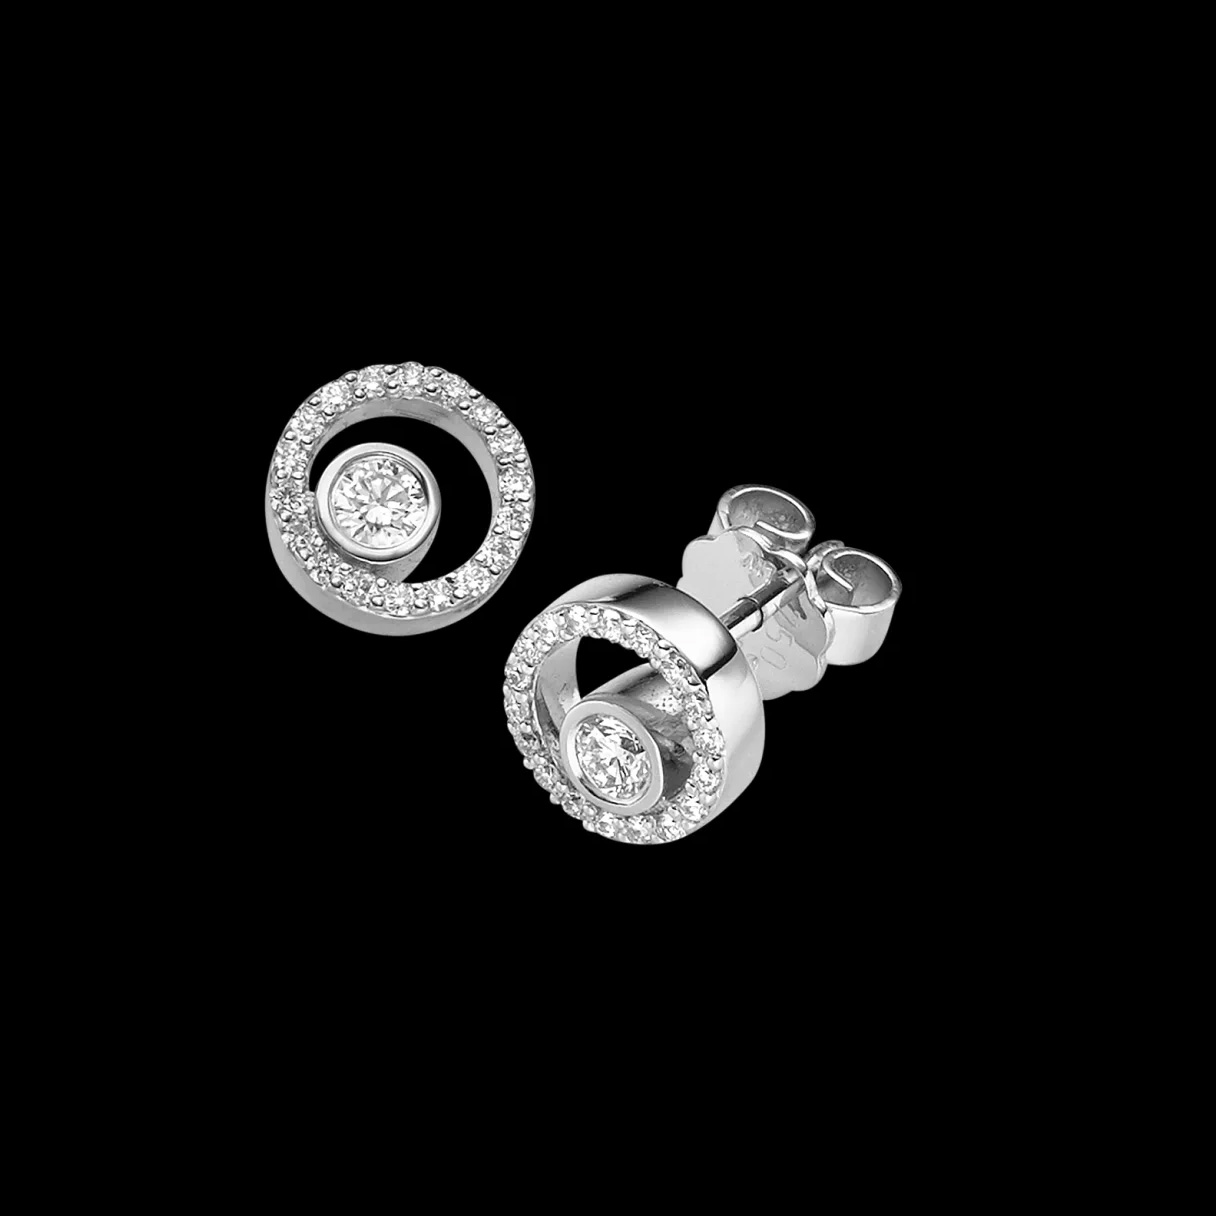 Wholesale OEM/ODM Jewelry Custom wholesale CZ silver earrings Exclusively Designed for You